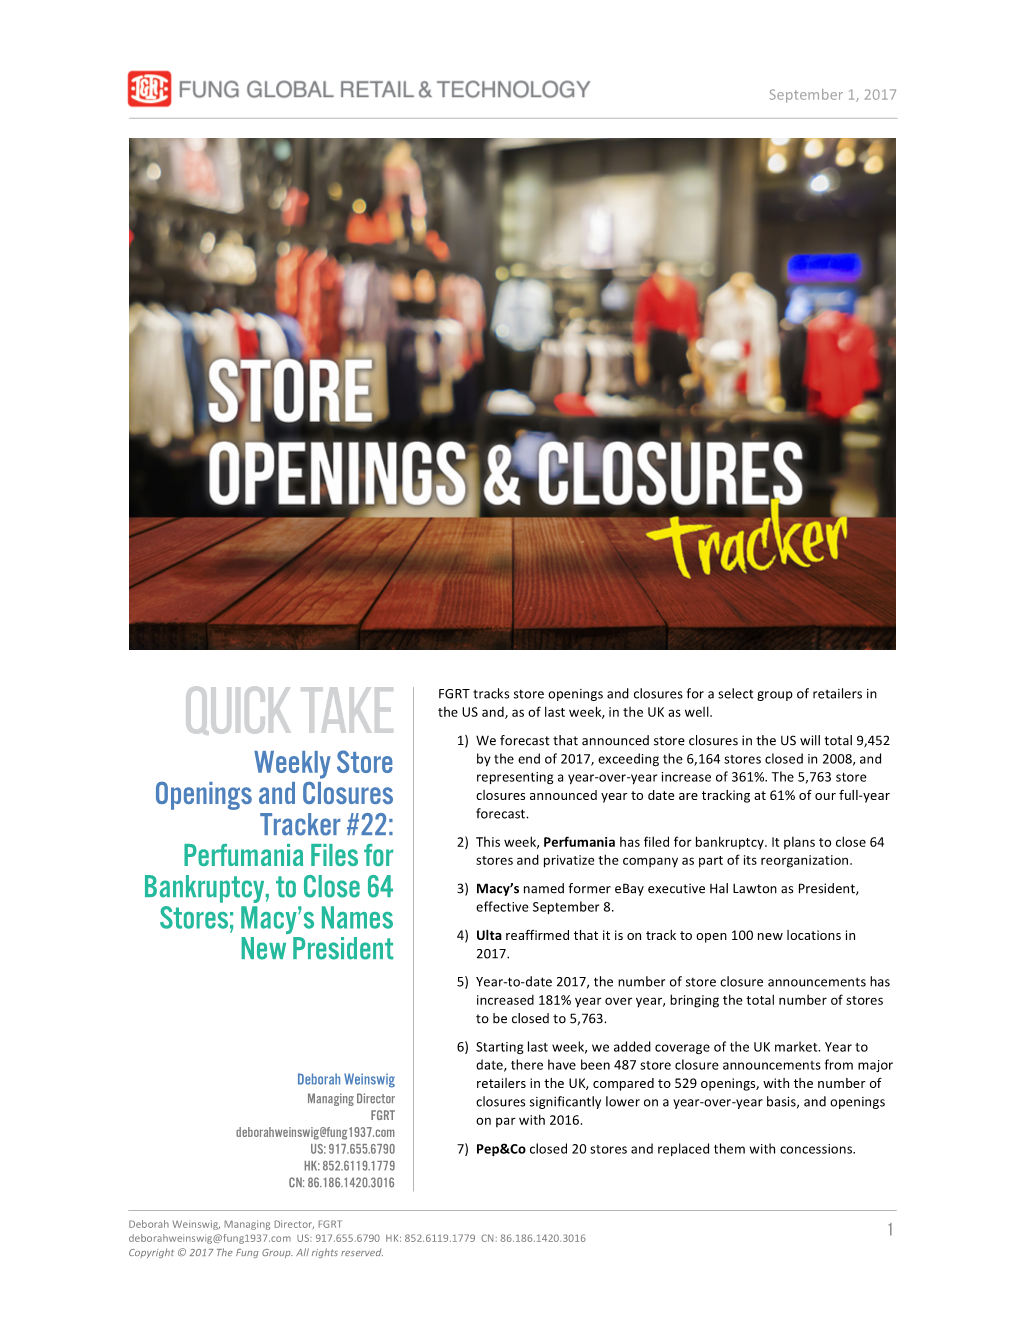 Weekly Store Openings and Closures Tracker